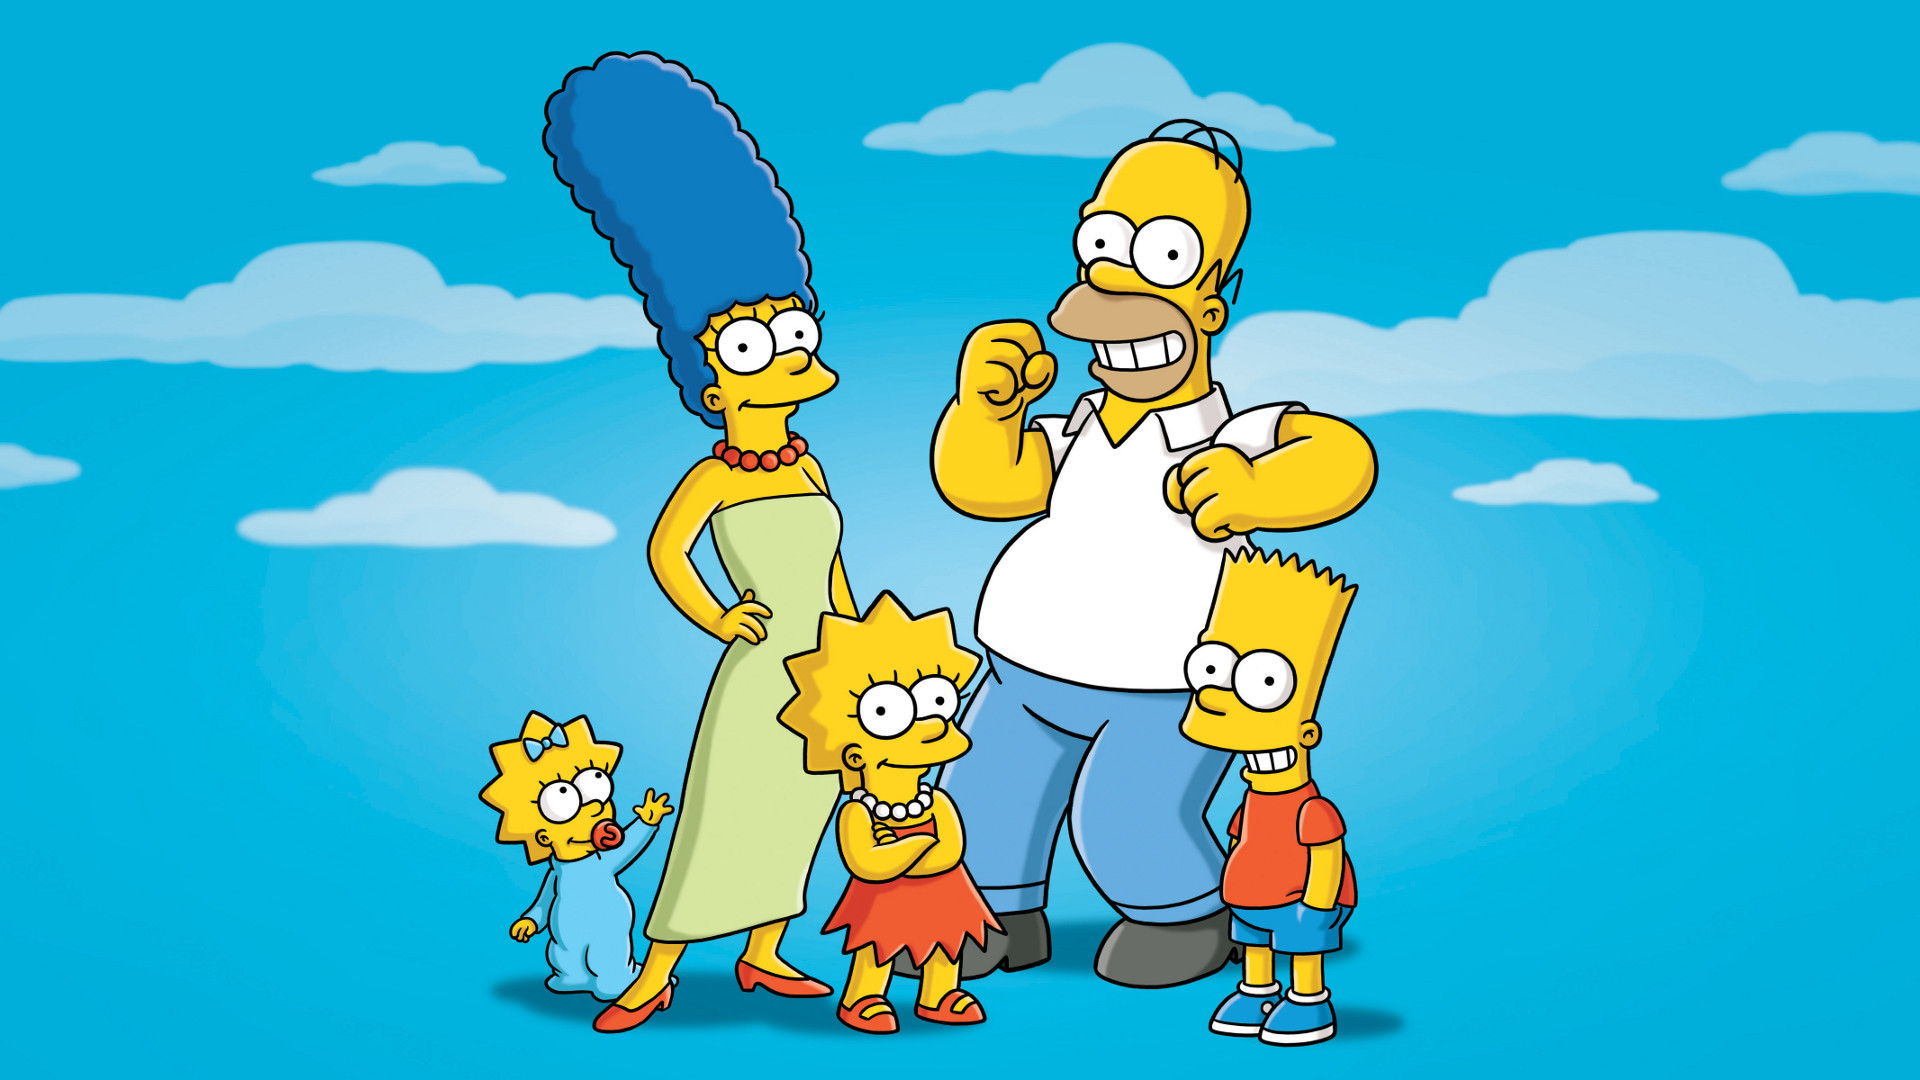 Wallpaper The Simpsons Desktop Pictures To Pin